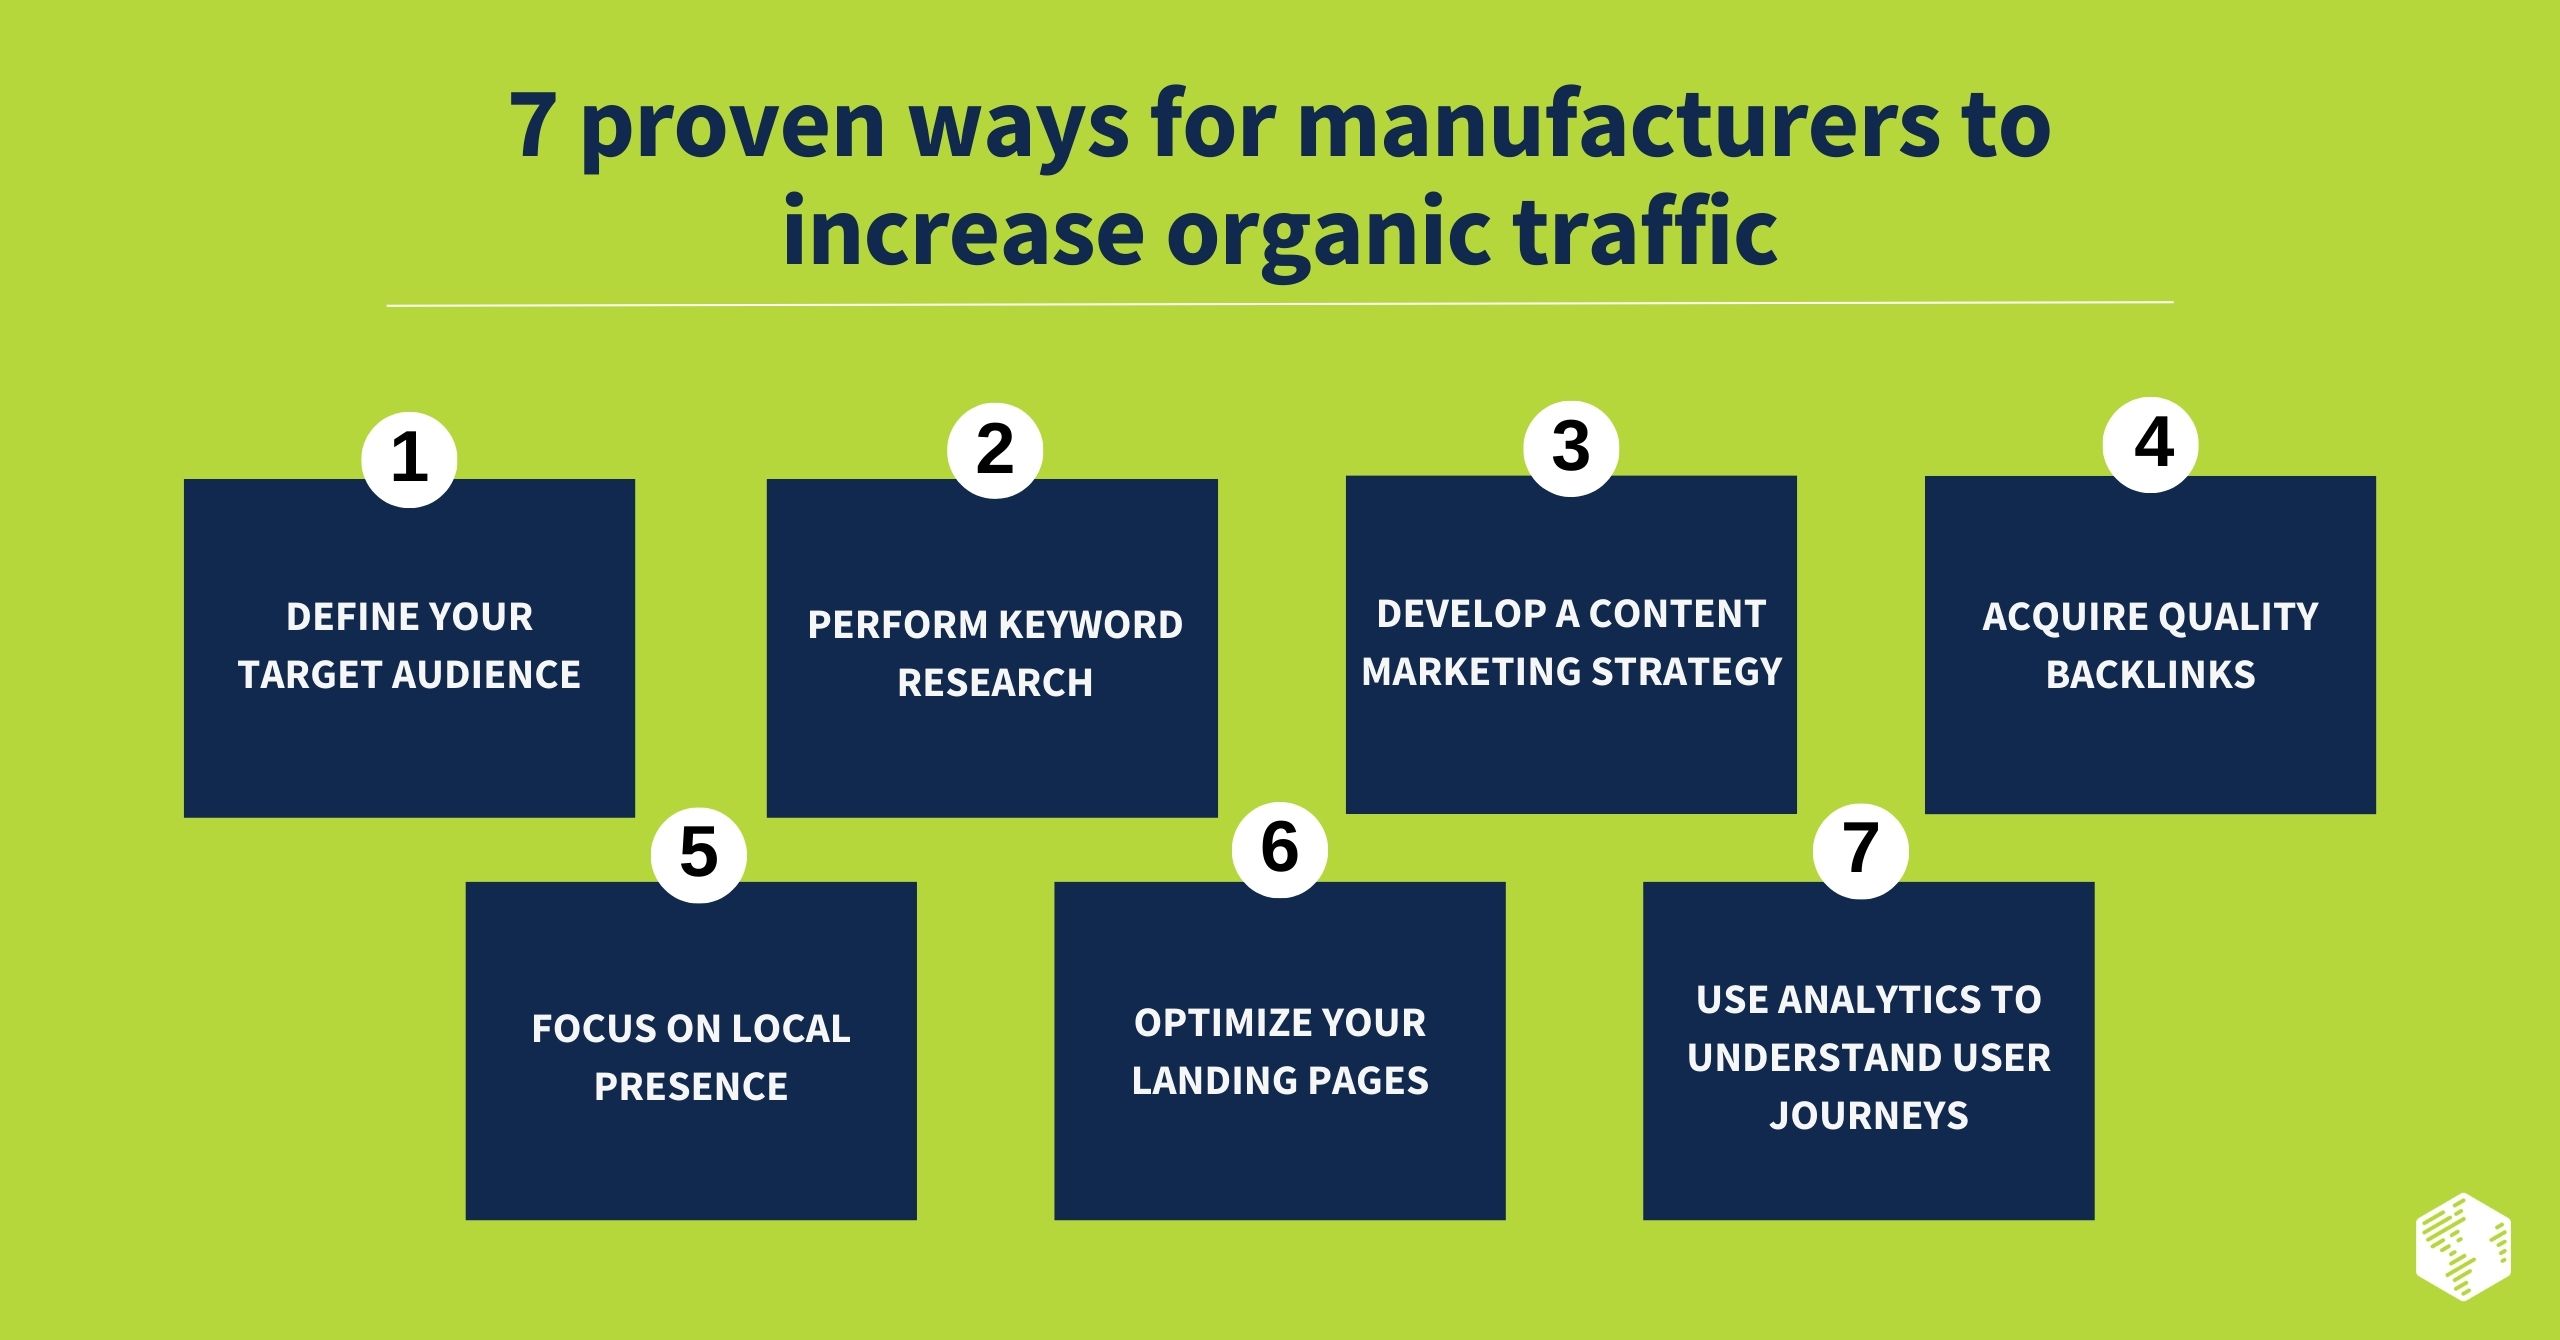 Tips to increase organic traffic for manufacturing companies